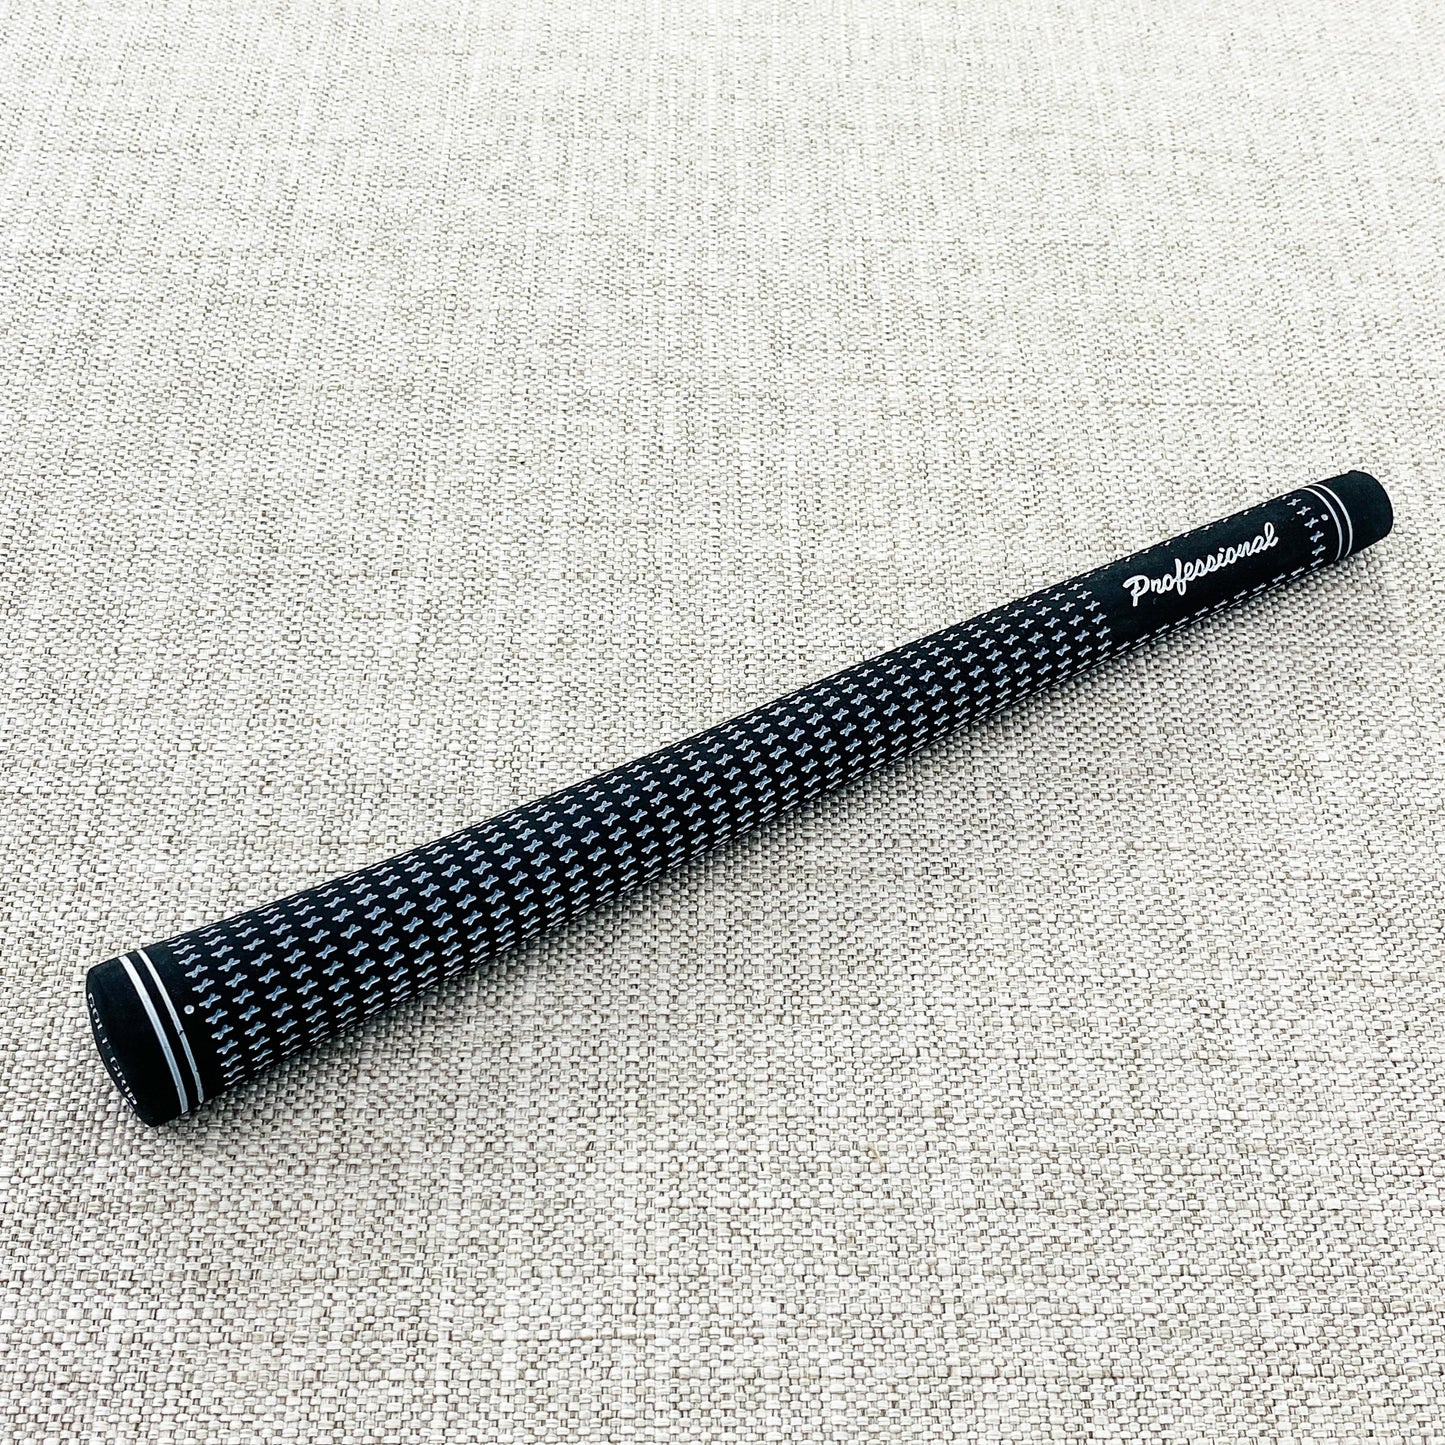 Professional brand budget swing grip. Choice of size. Black/White - Price includes fitment.